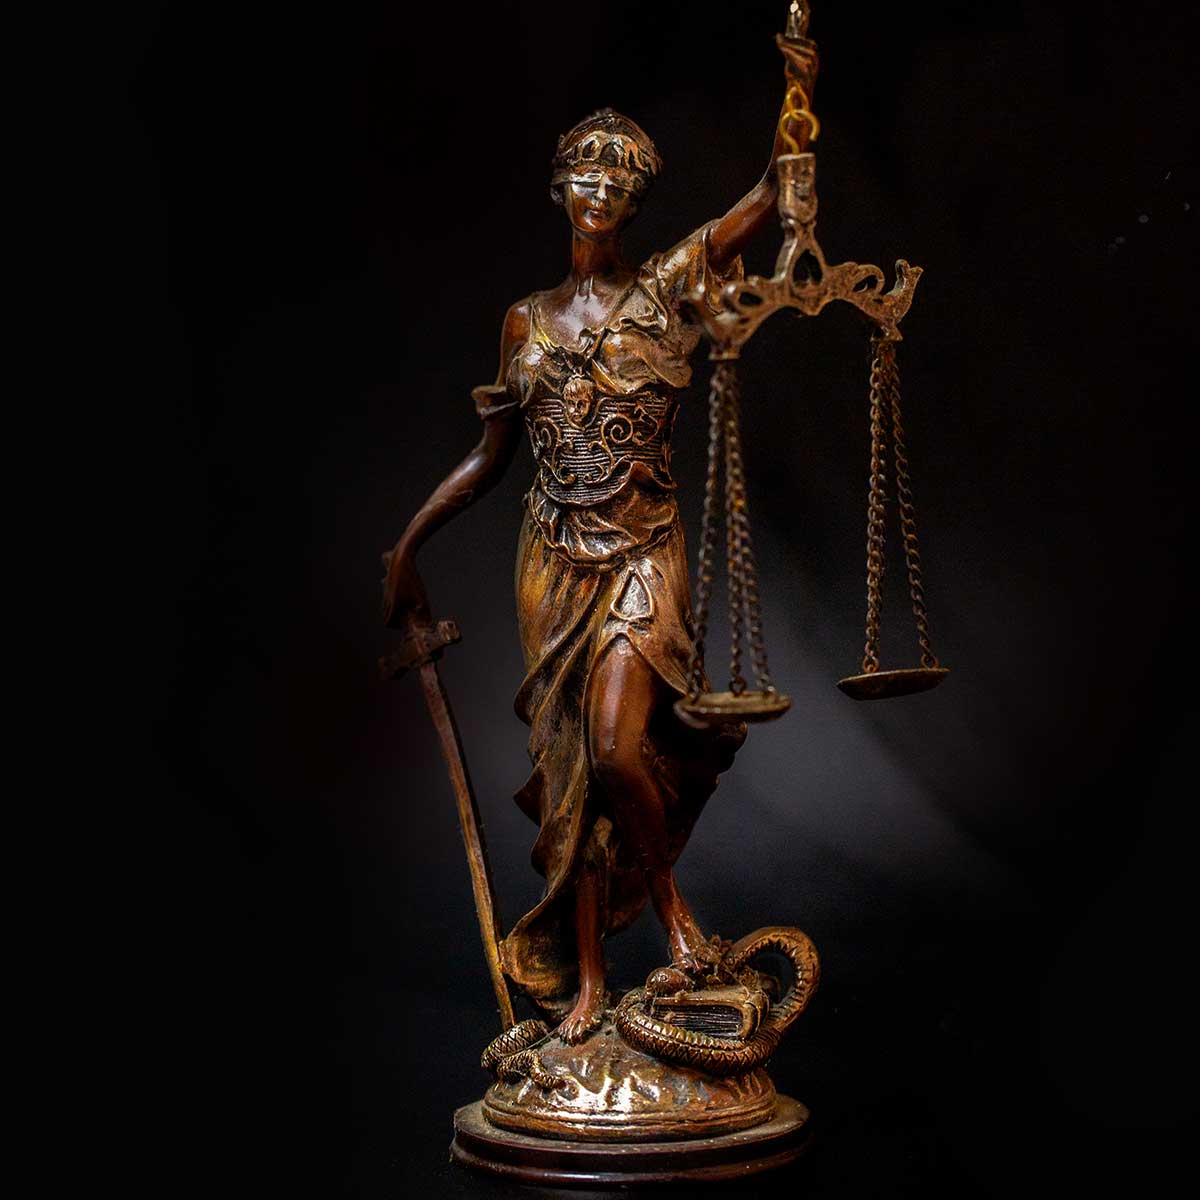 A statuette of a blindfolded Lady Justice, holding scales and a sword.